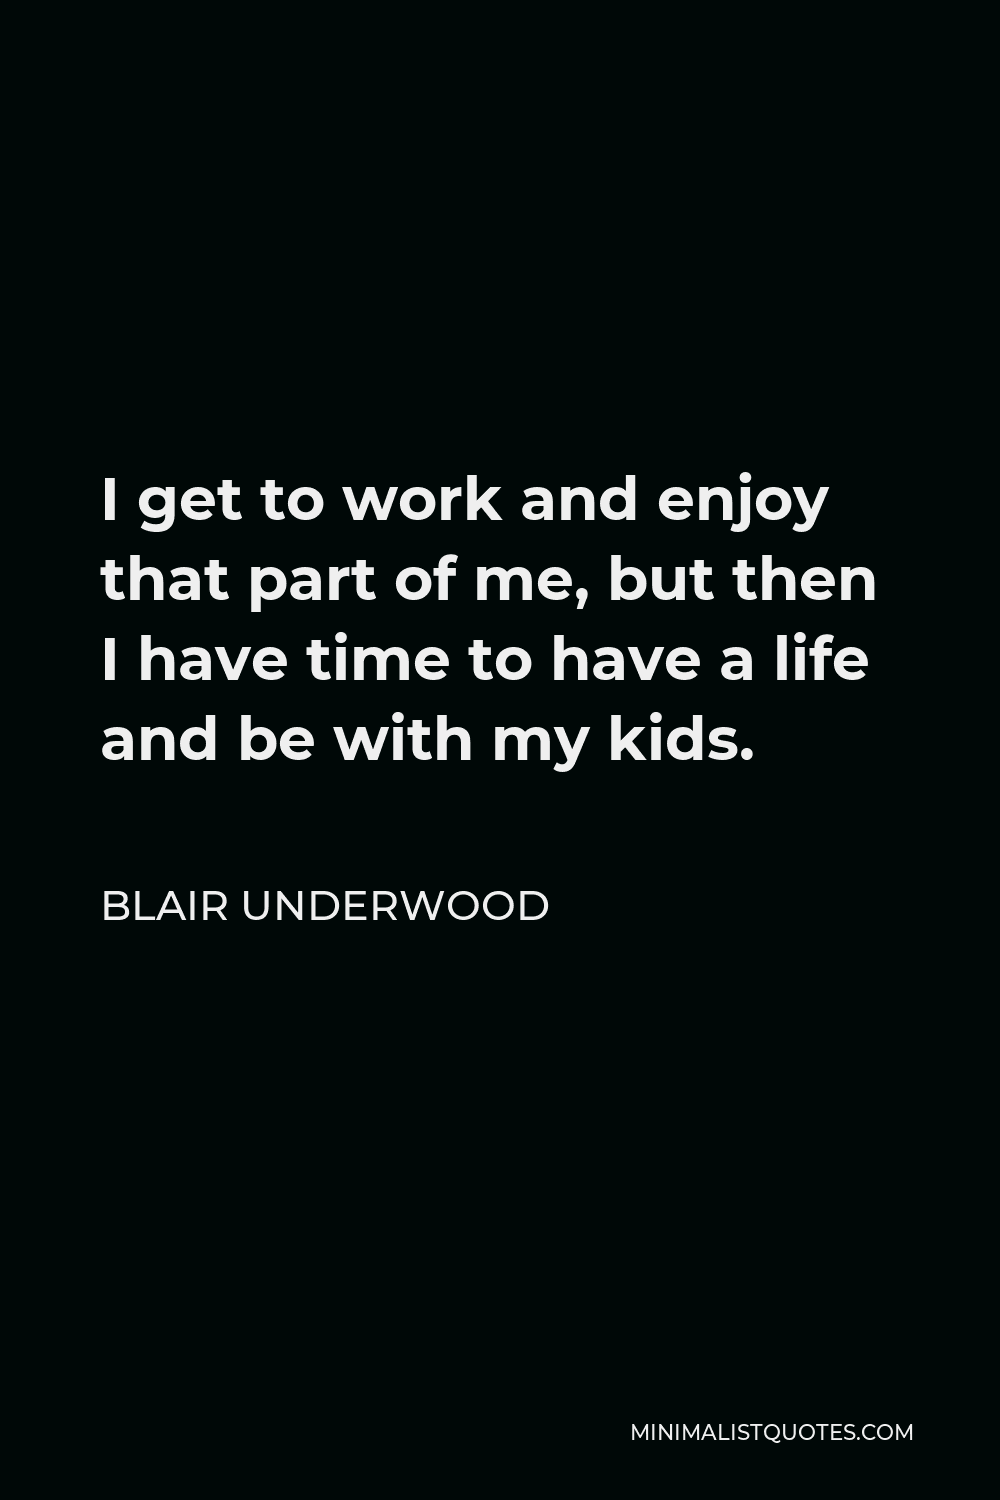 Blair Underwood Quote - I get to work and enjoy that part of me, but then I have time to have a life and be with my kids.